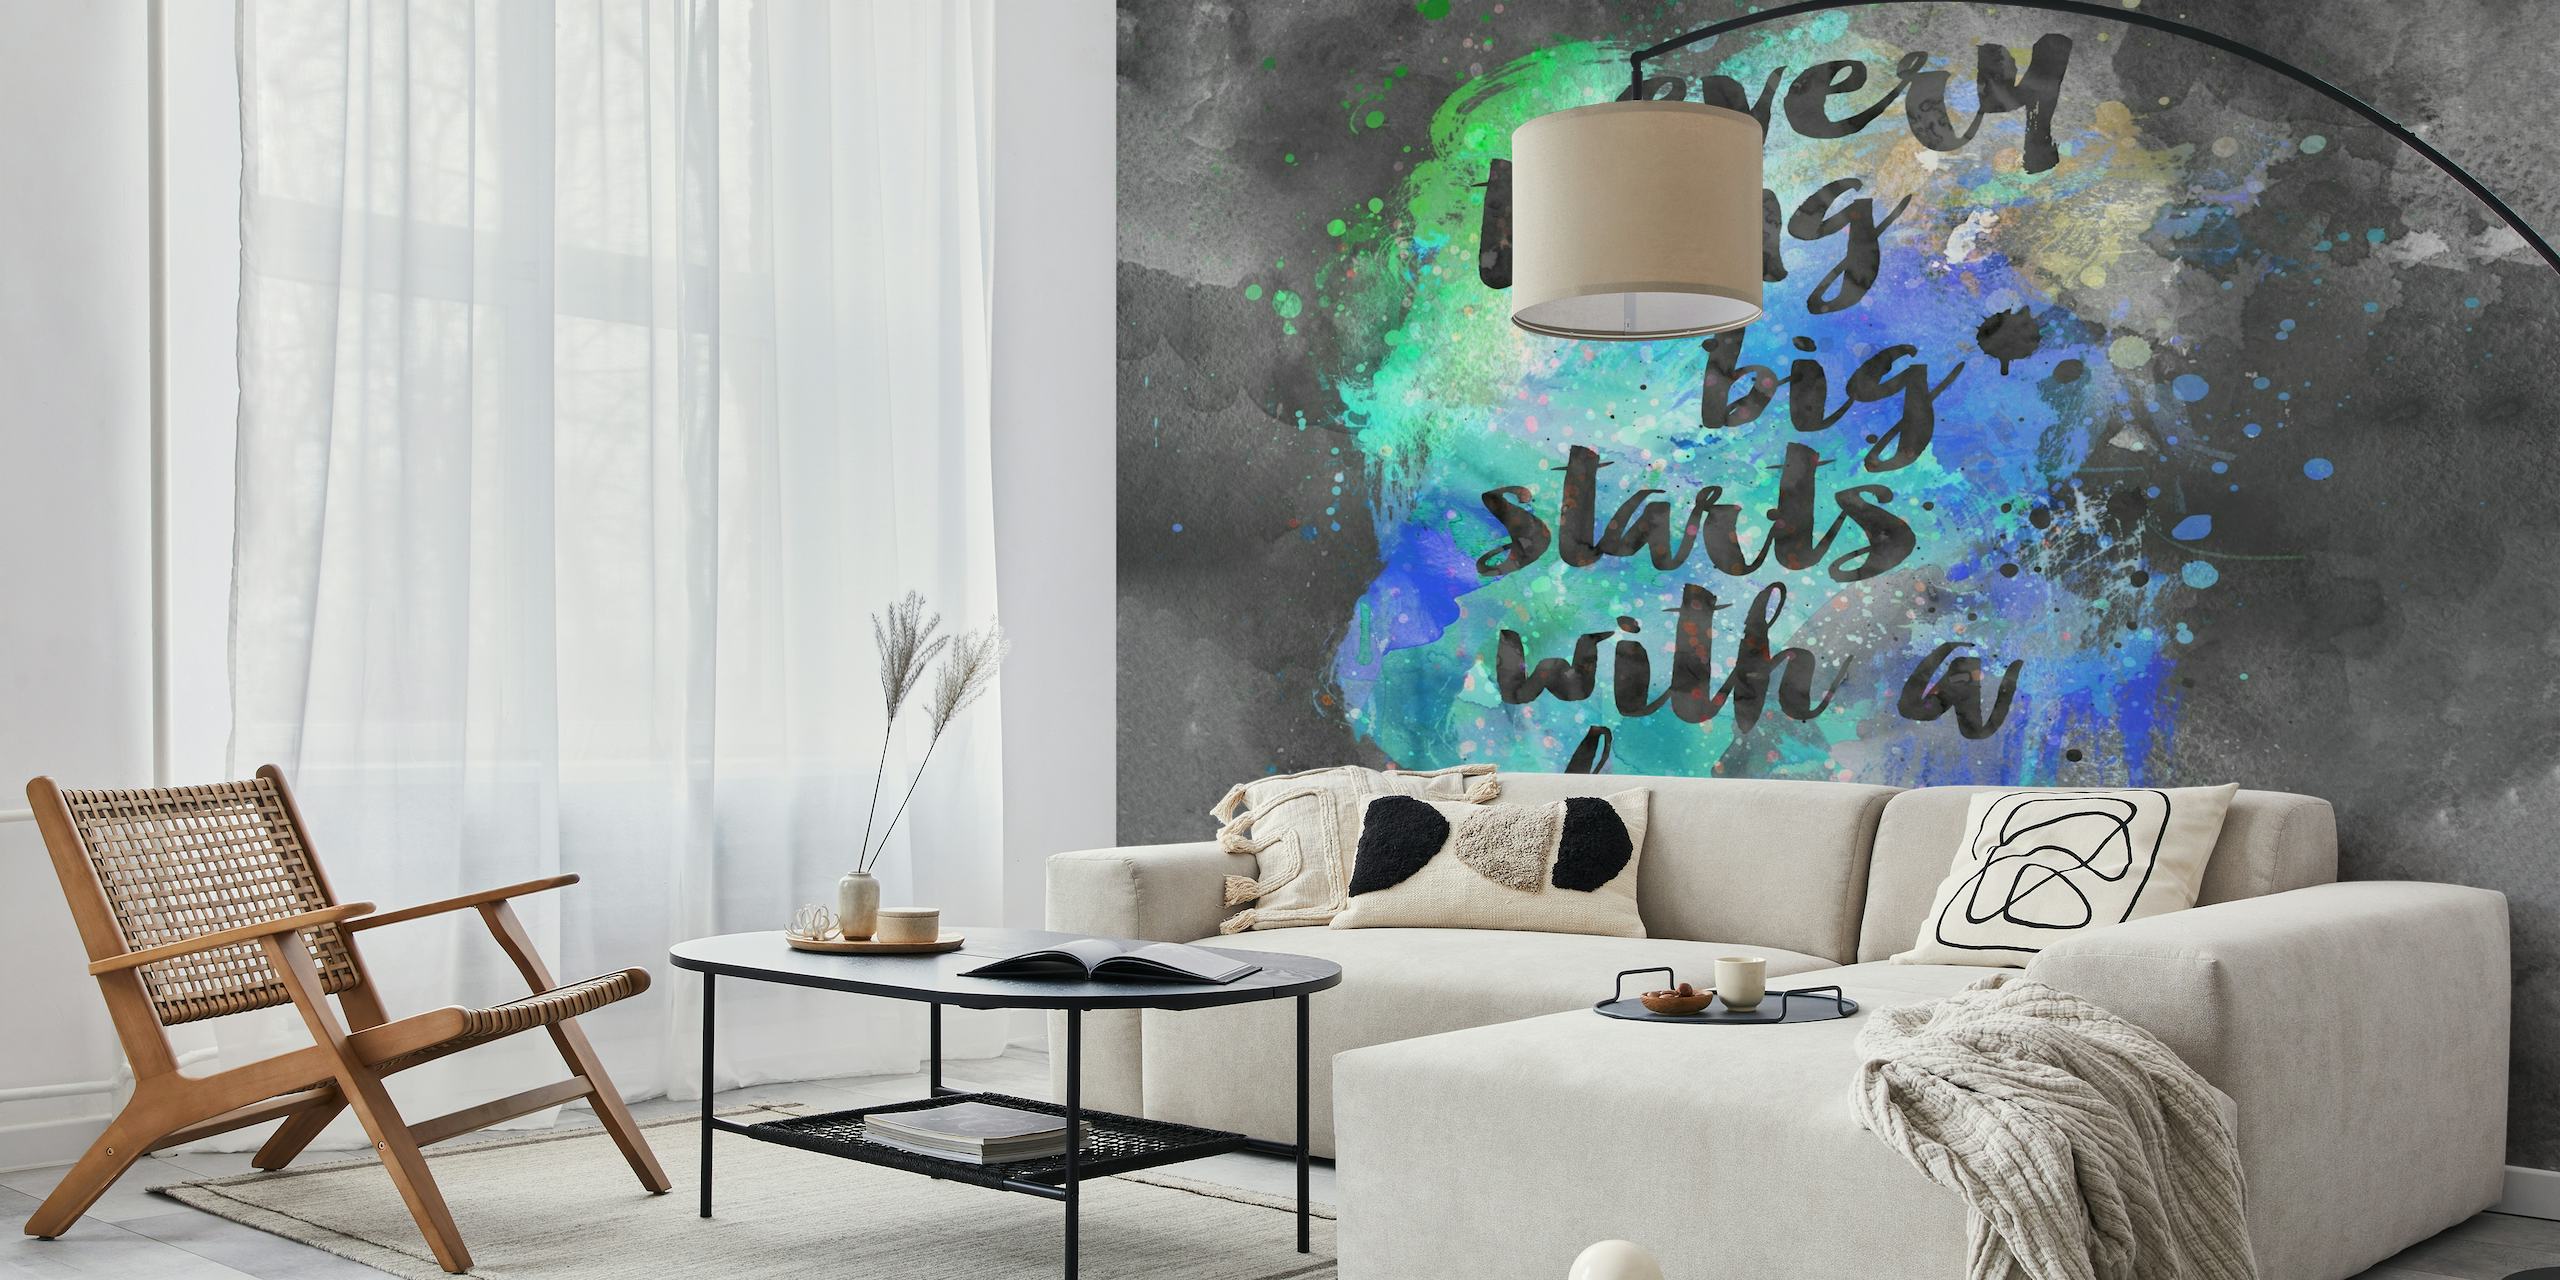 Dream Big Typography wall mural with inspirational quote on abstract watercolor background